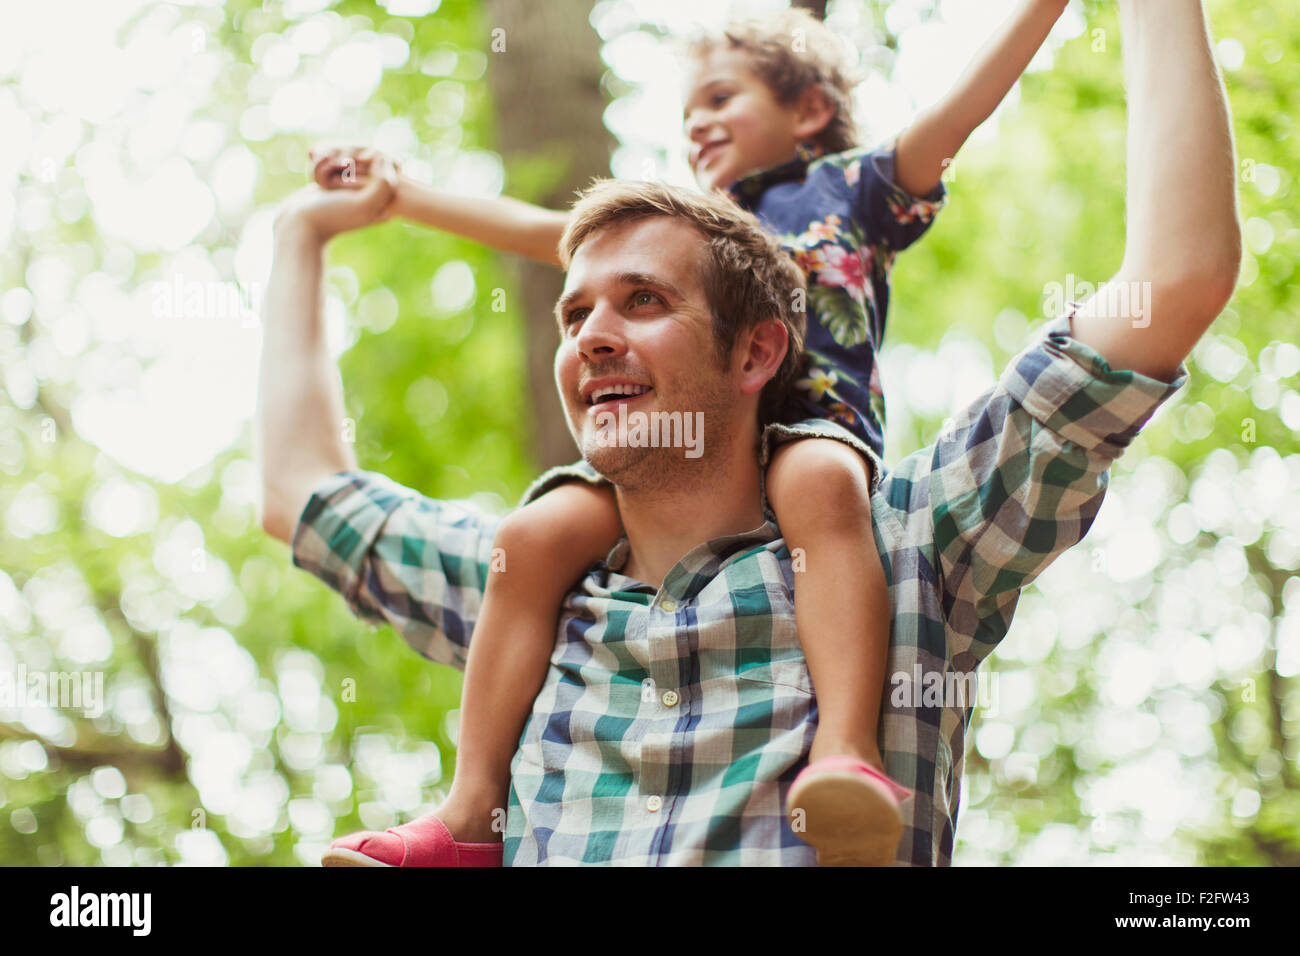 Father carrying son on shoulders below trees Stock Photo